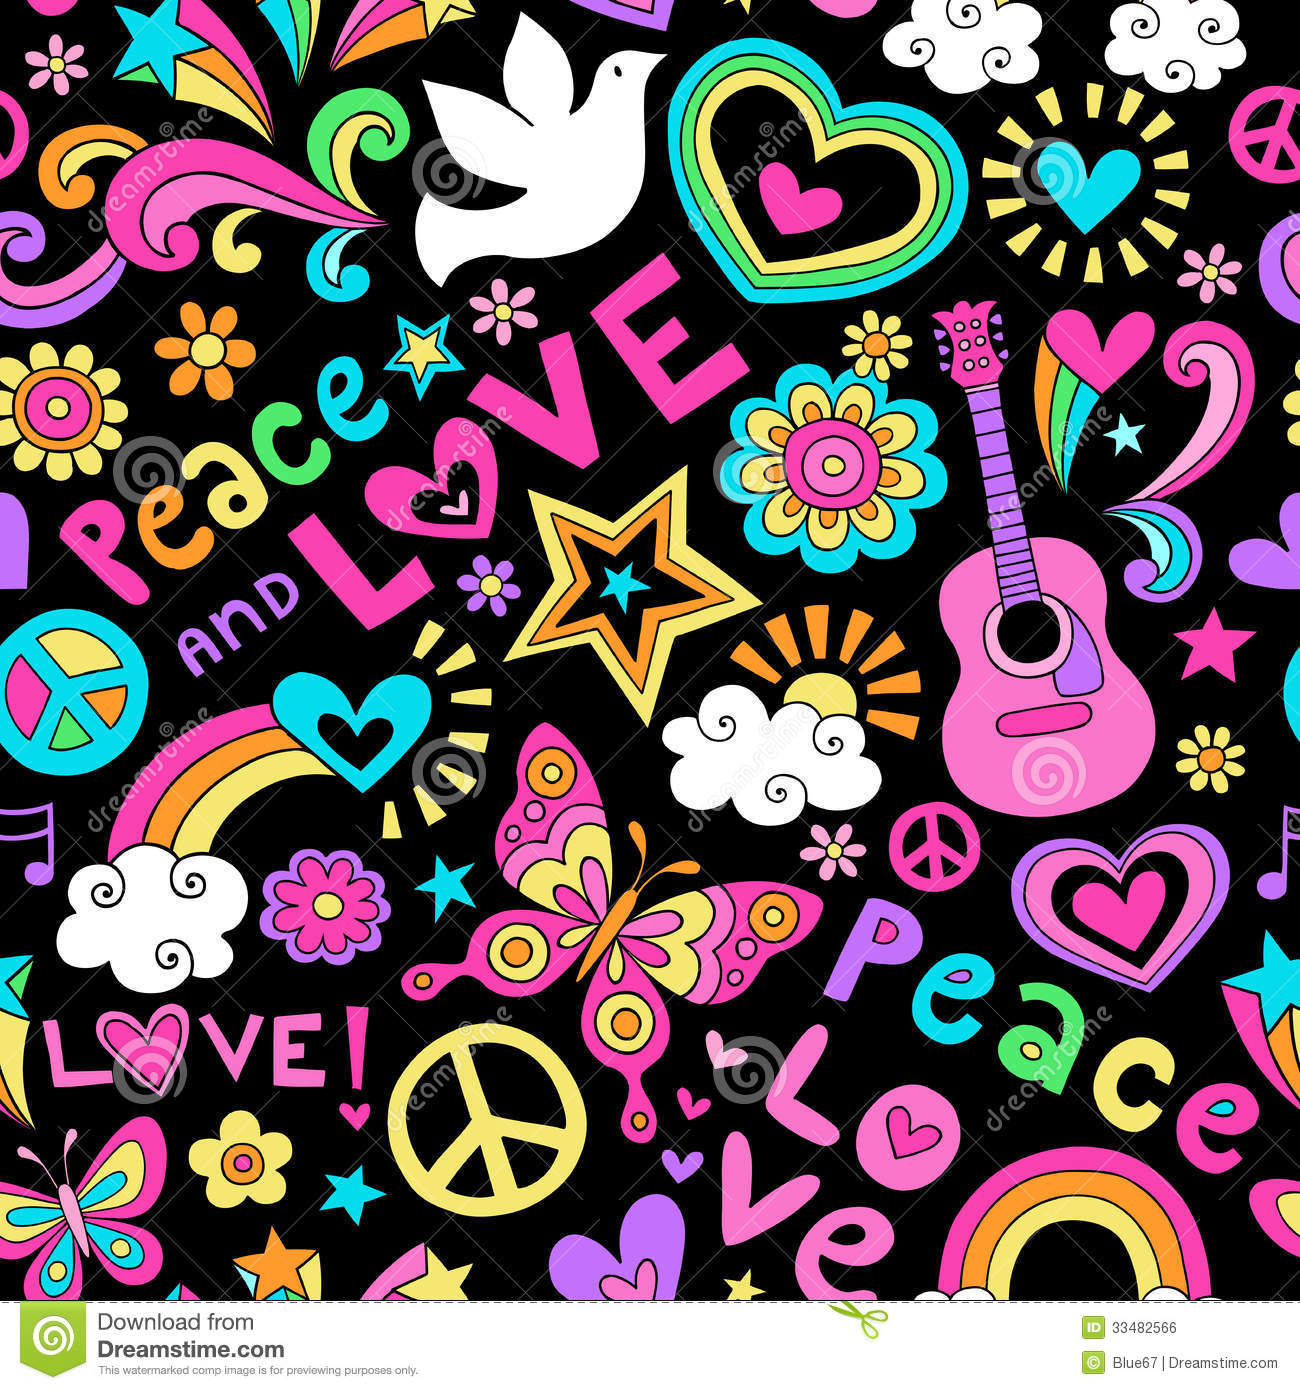 FunMozar Peace Backgrounds Wallpapers